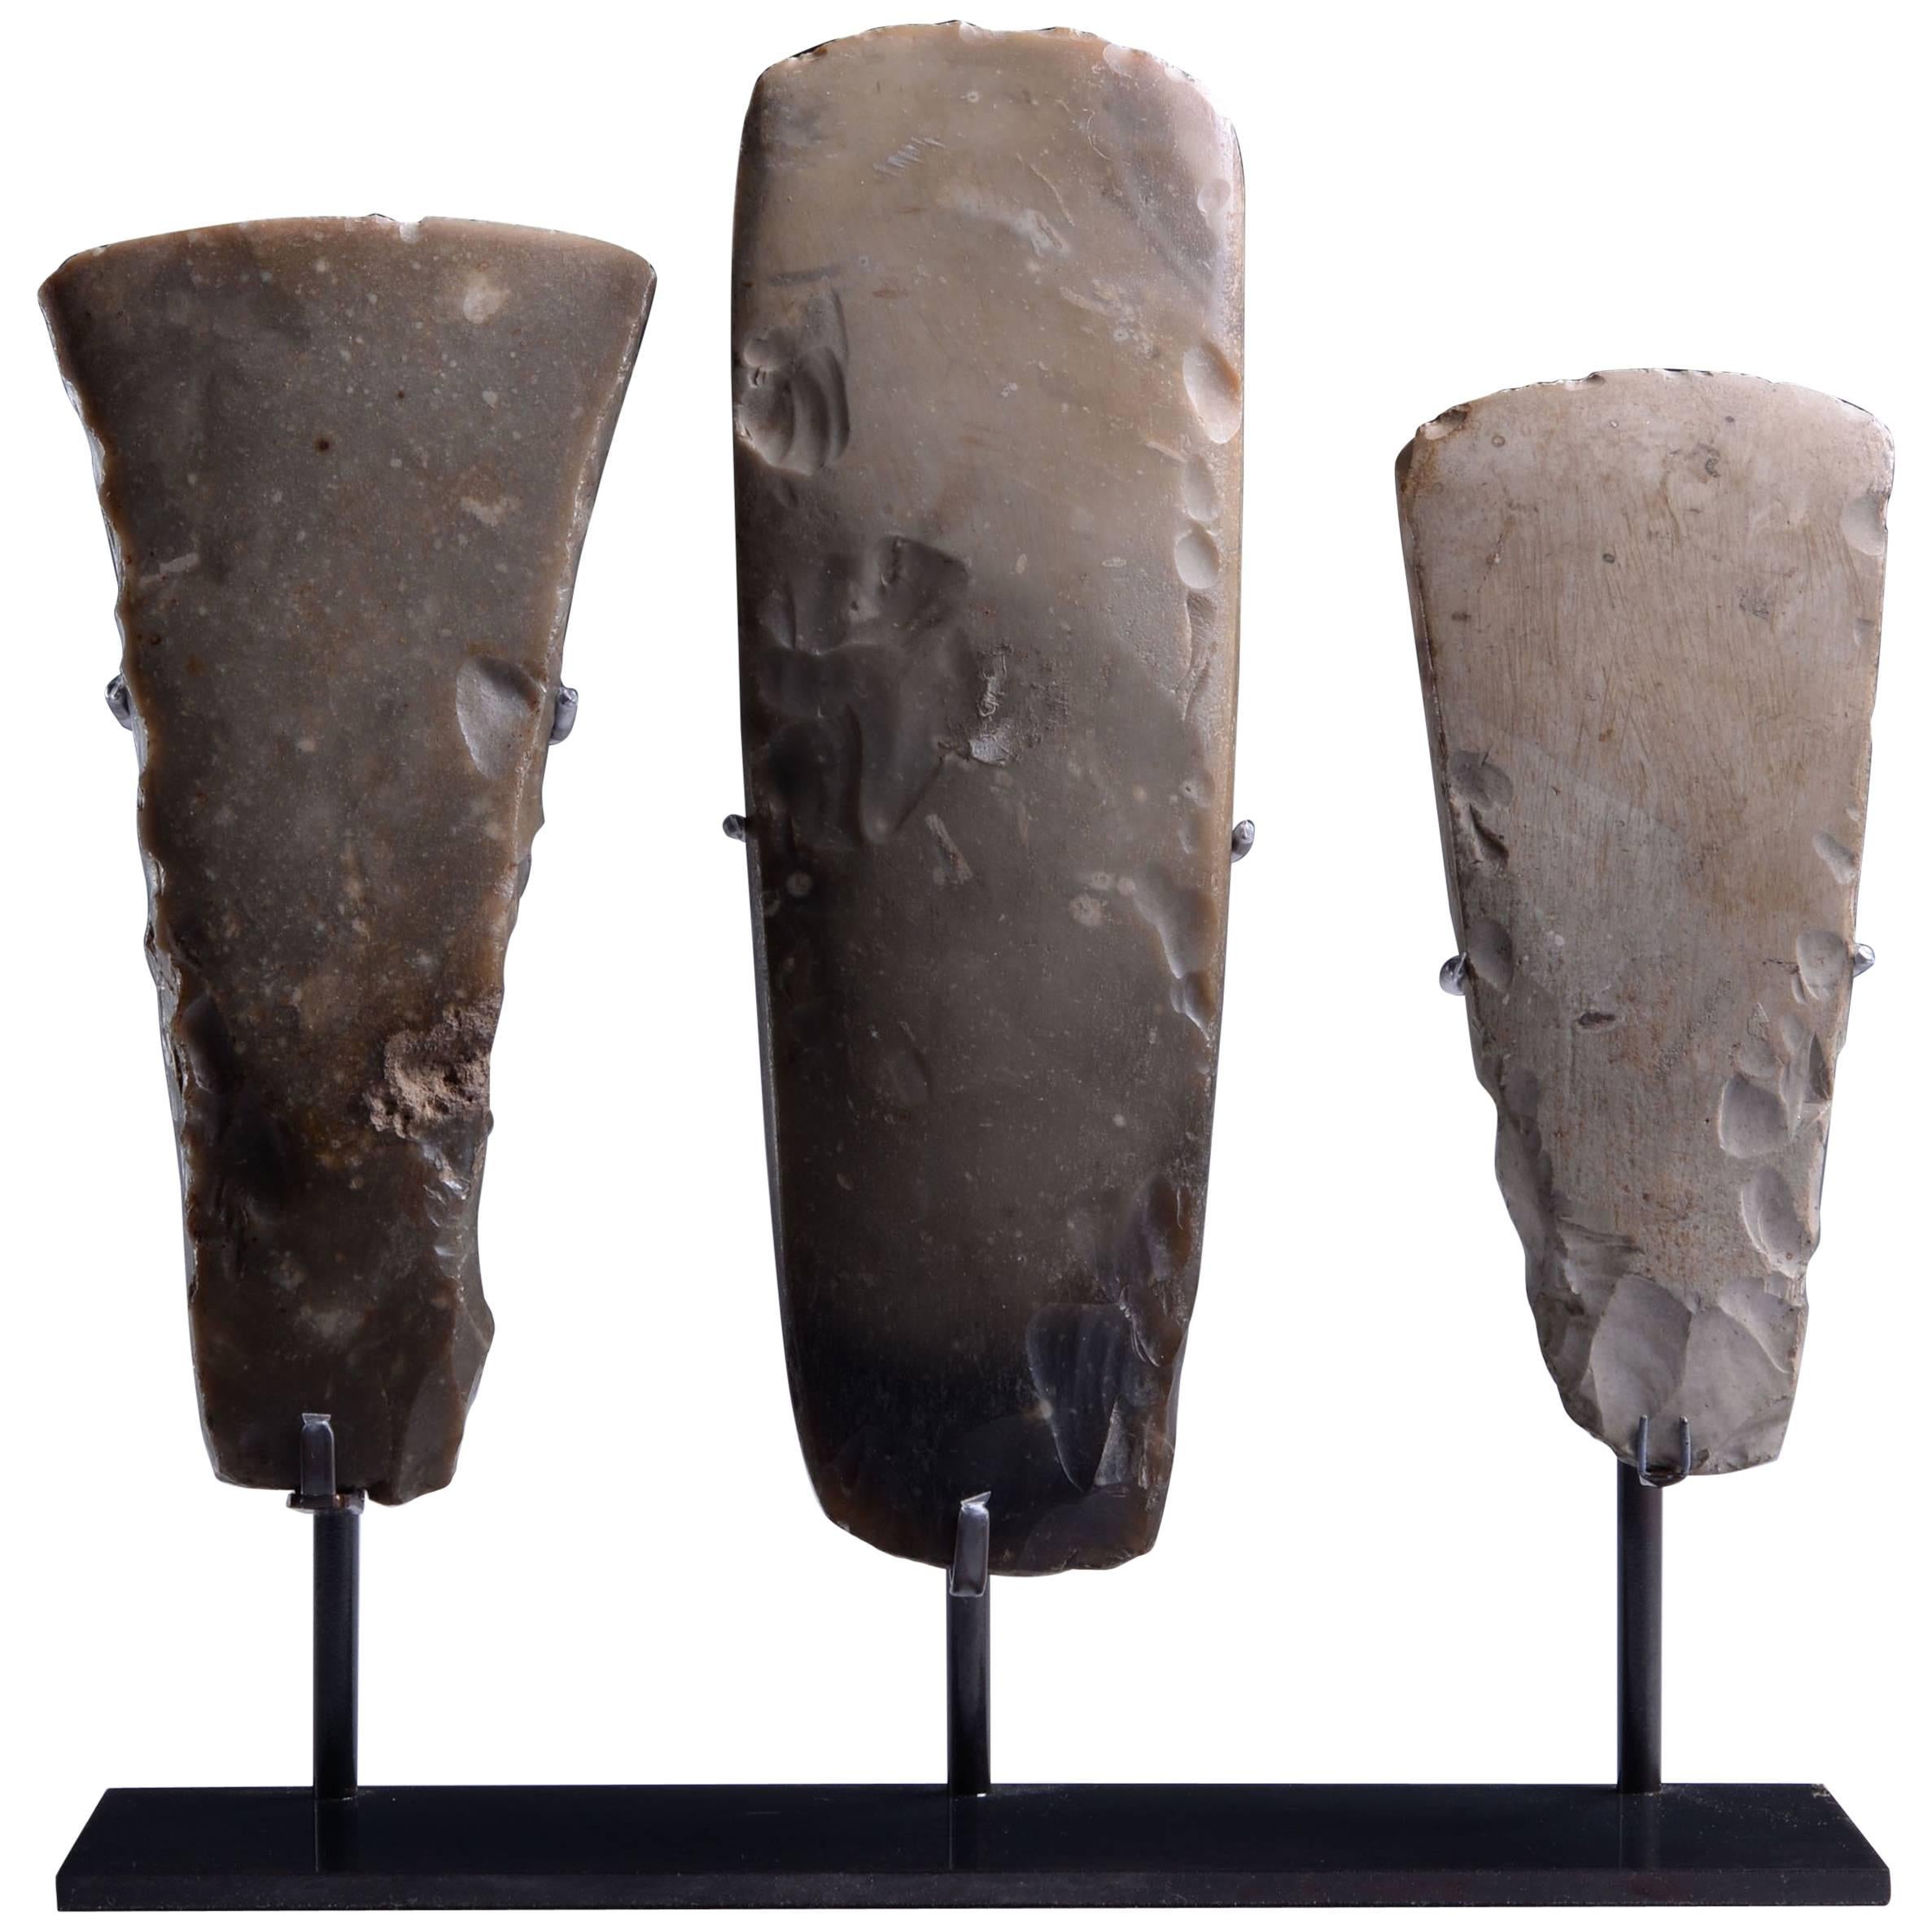 Collection of Prehistoric Neolithic Danish Flint Axes, 1900 BC